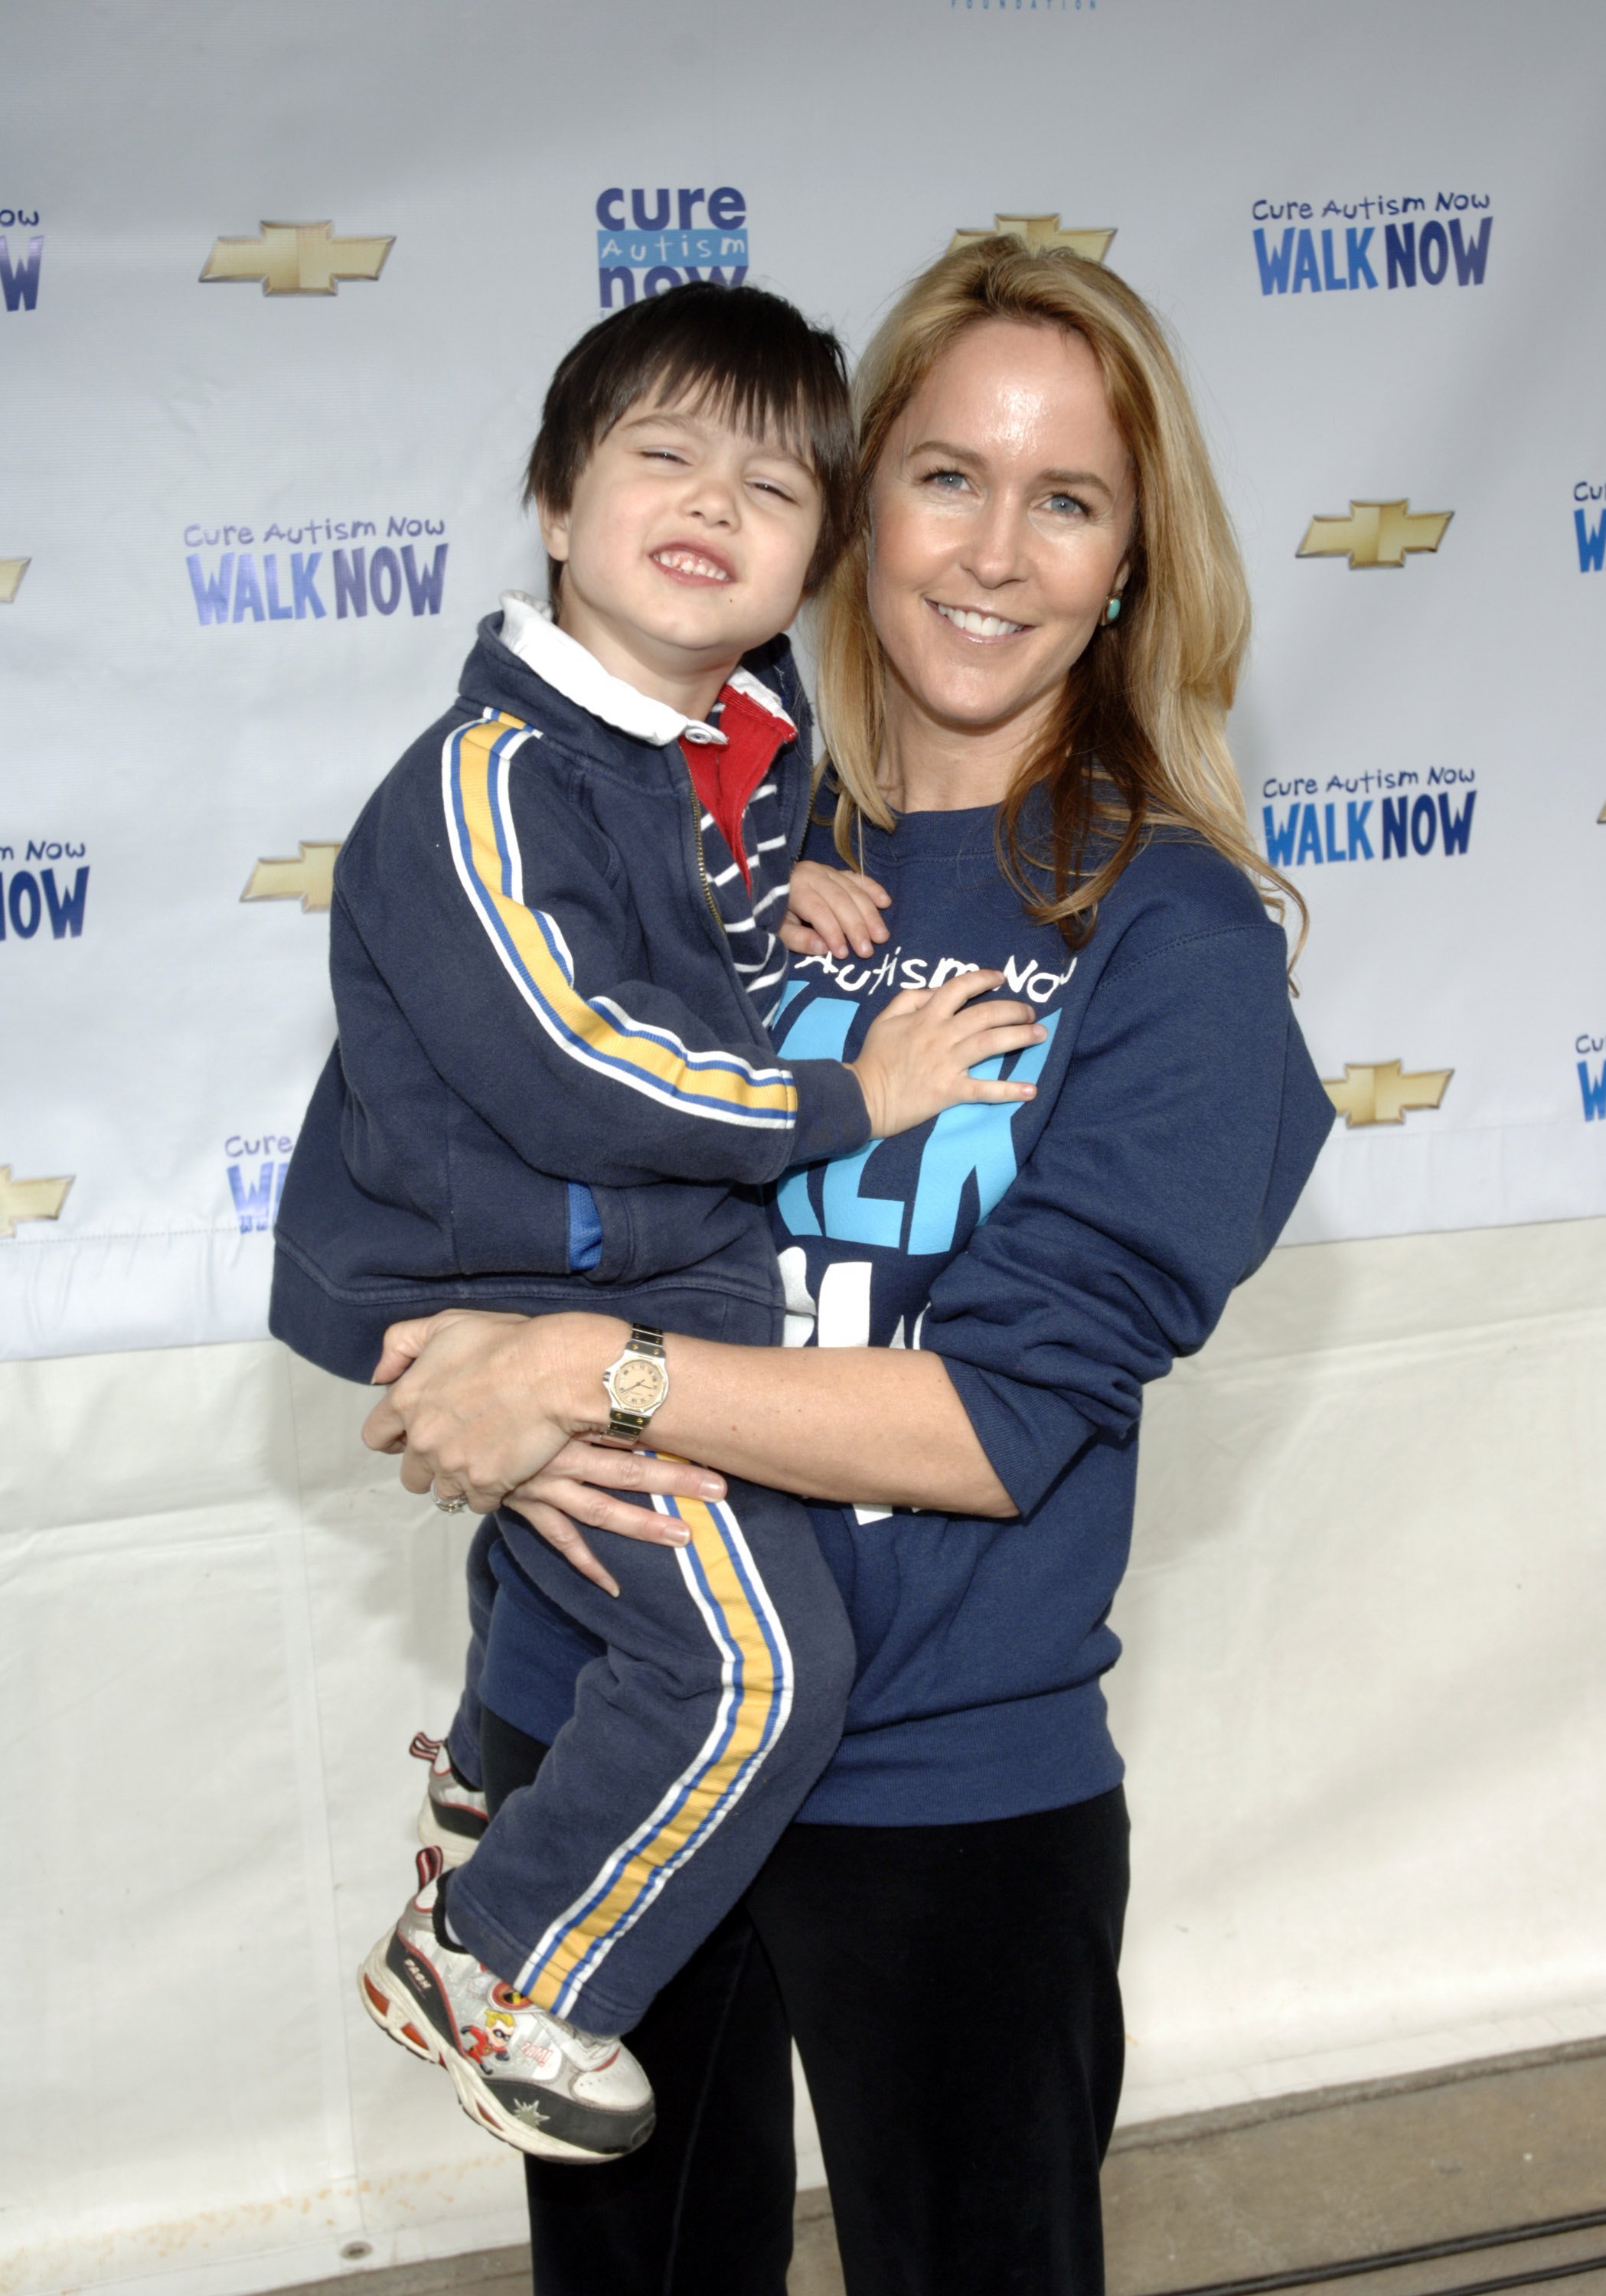 Erin Murphy with her son Parker at the CURE Autism Now 4th Annual Walk Now at the Rose Bowl on April 22, 2006 in Pasadena, California. / Source: Getty Images